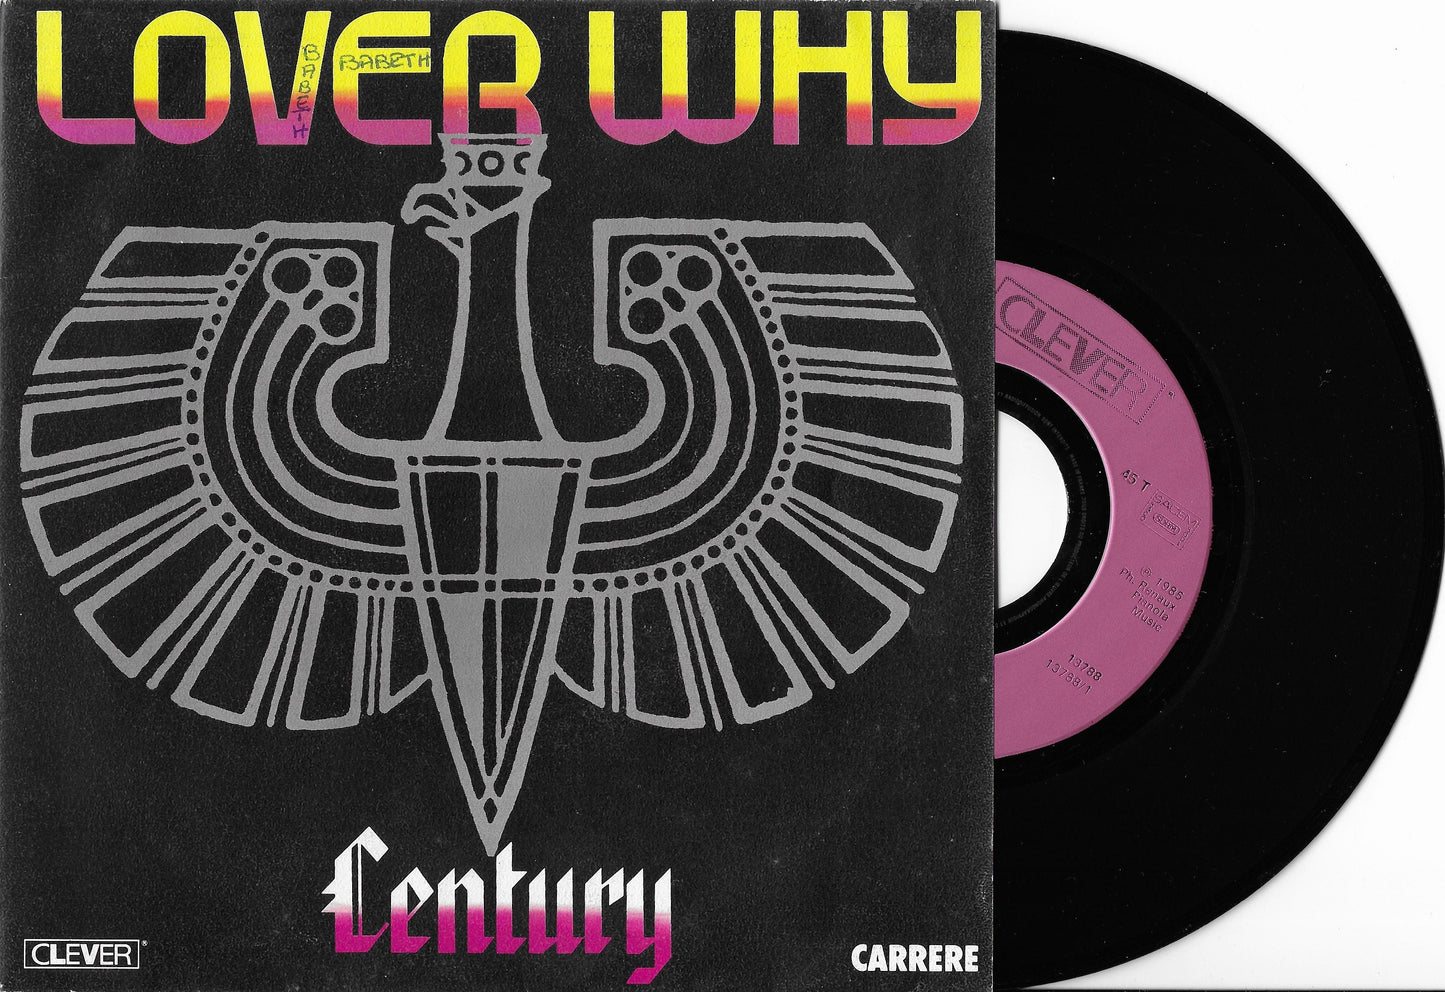 CENTURY - Lover Why